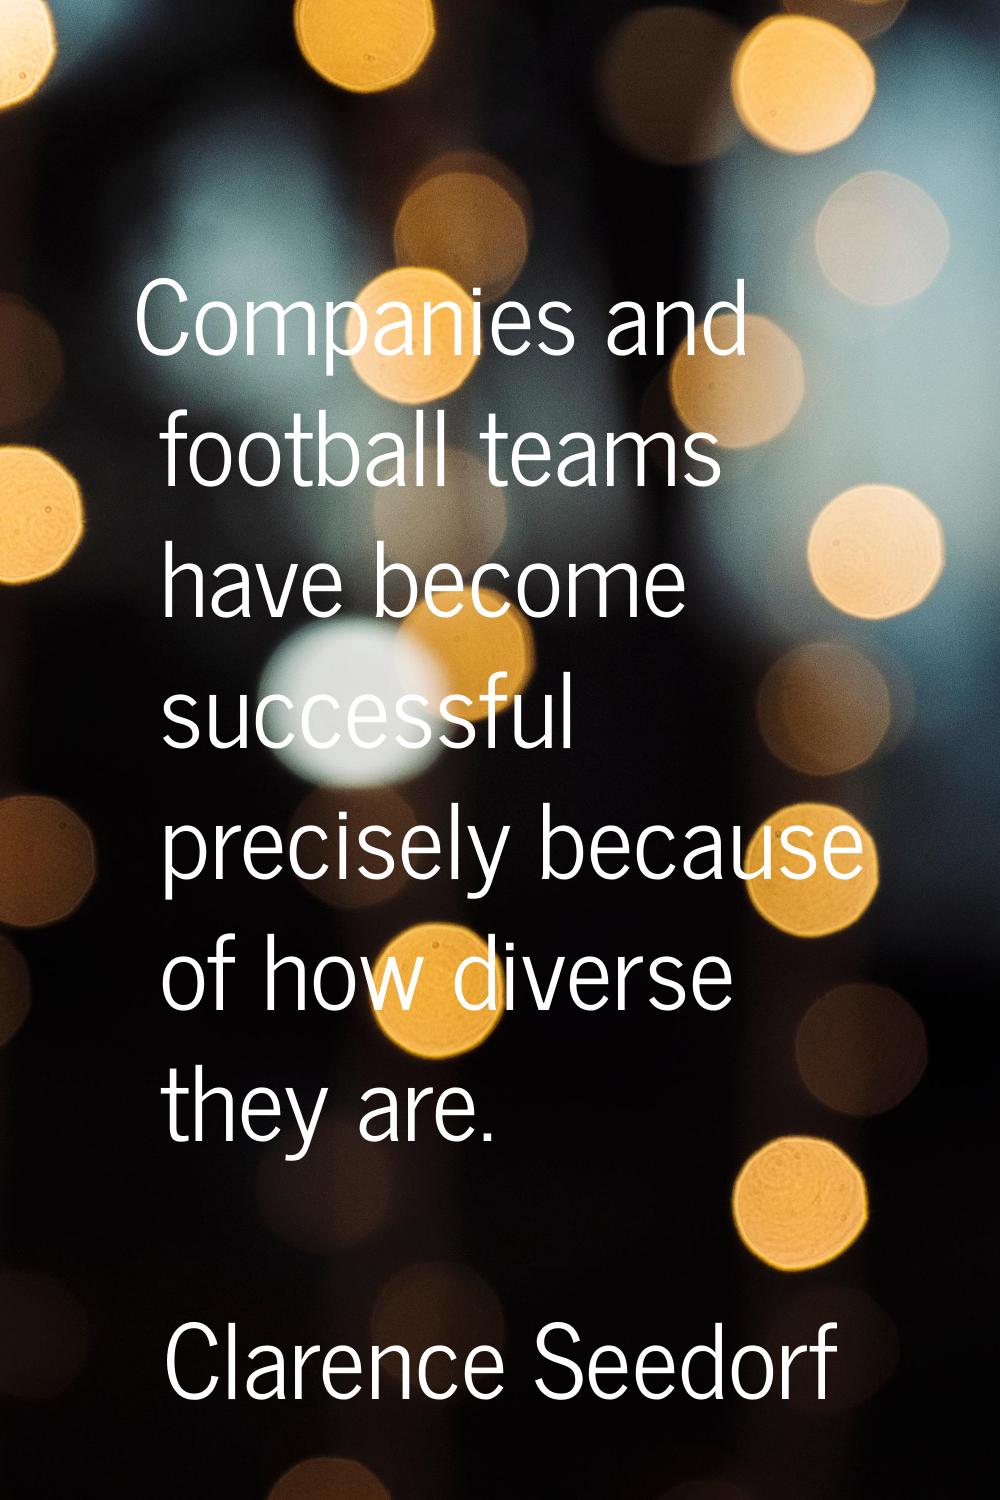 Companies and football teams have become successful precisely because of how diverse they are.